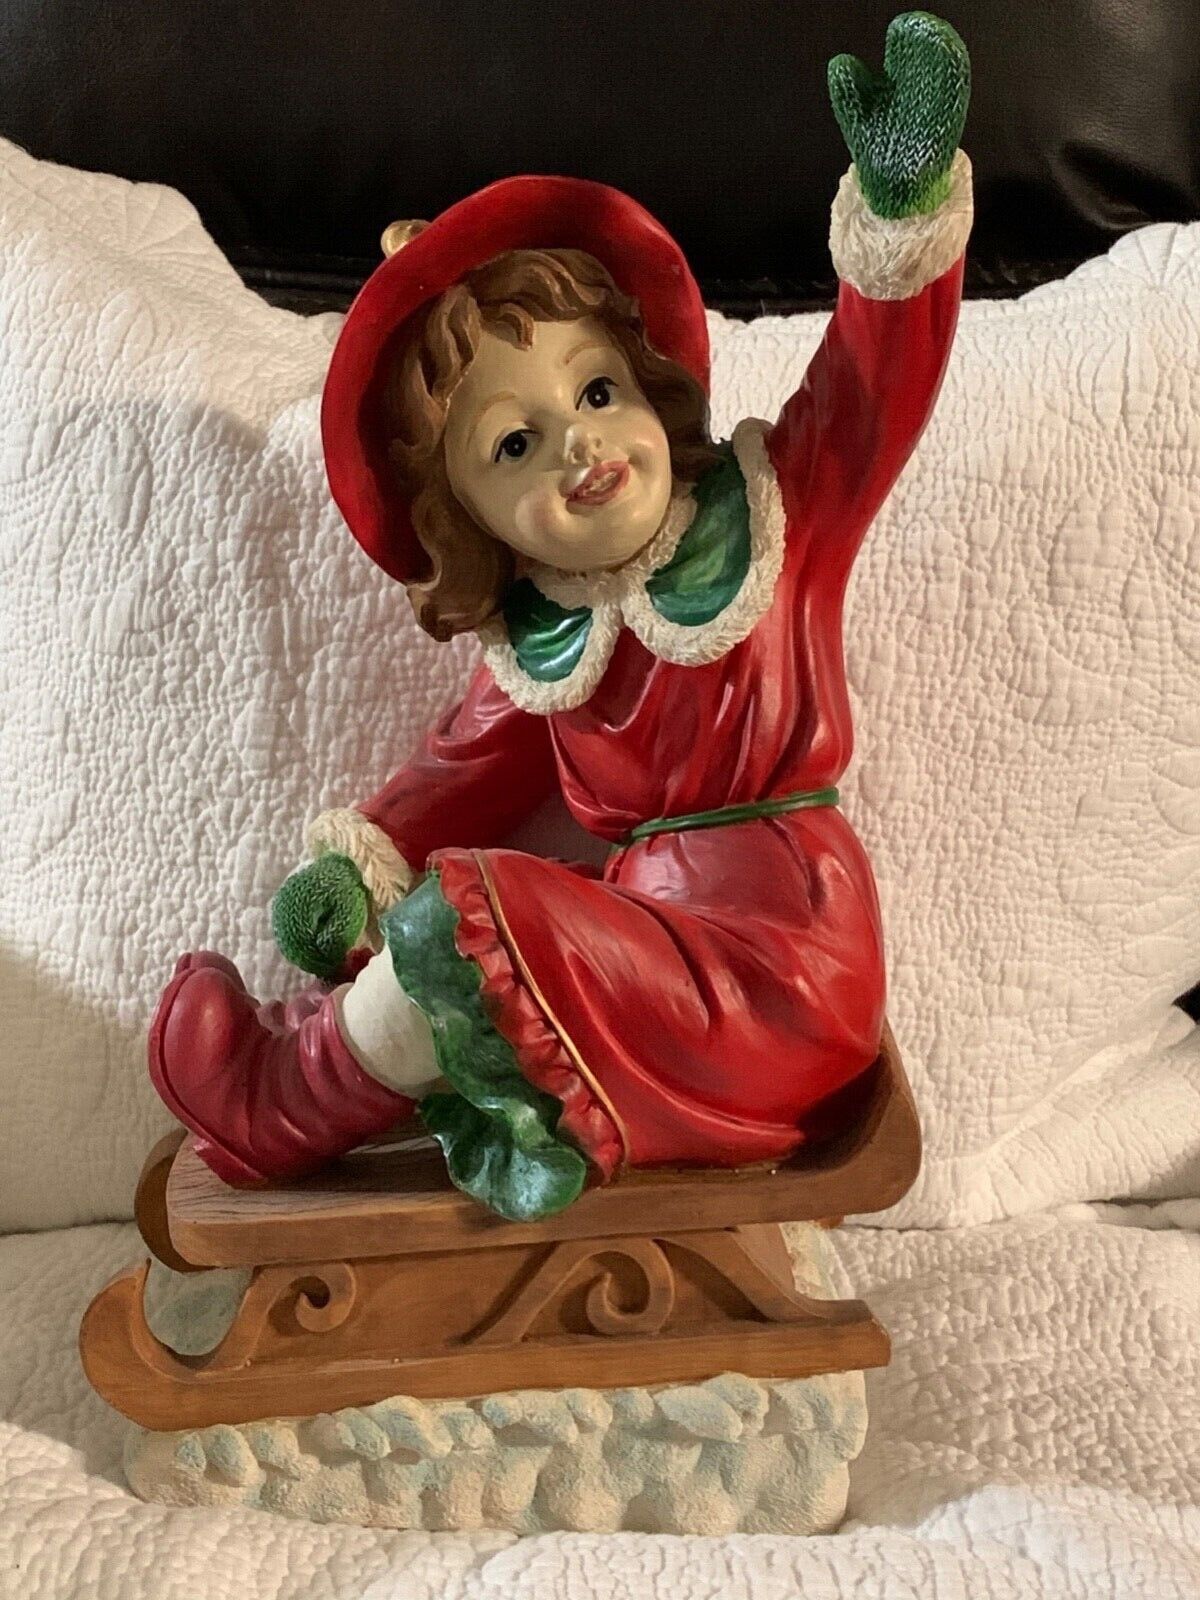 VERY CUTE FIGURINE OF A GIRL ON A SLED MADE OF PORCELAIN NWT